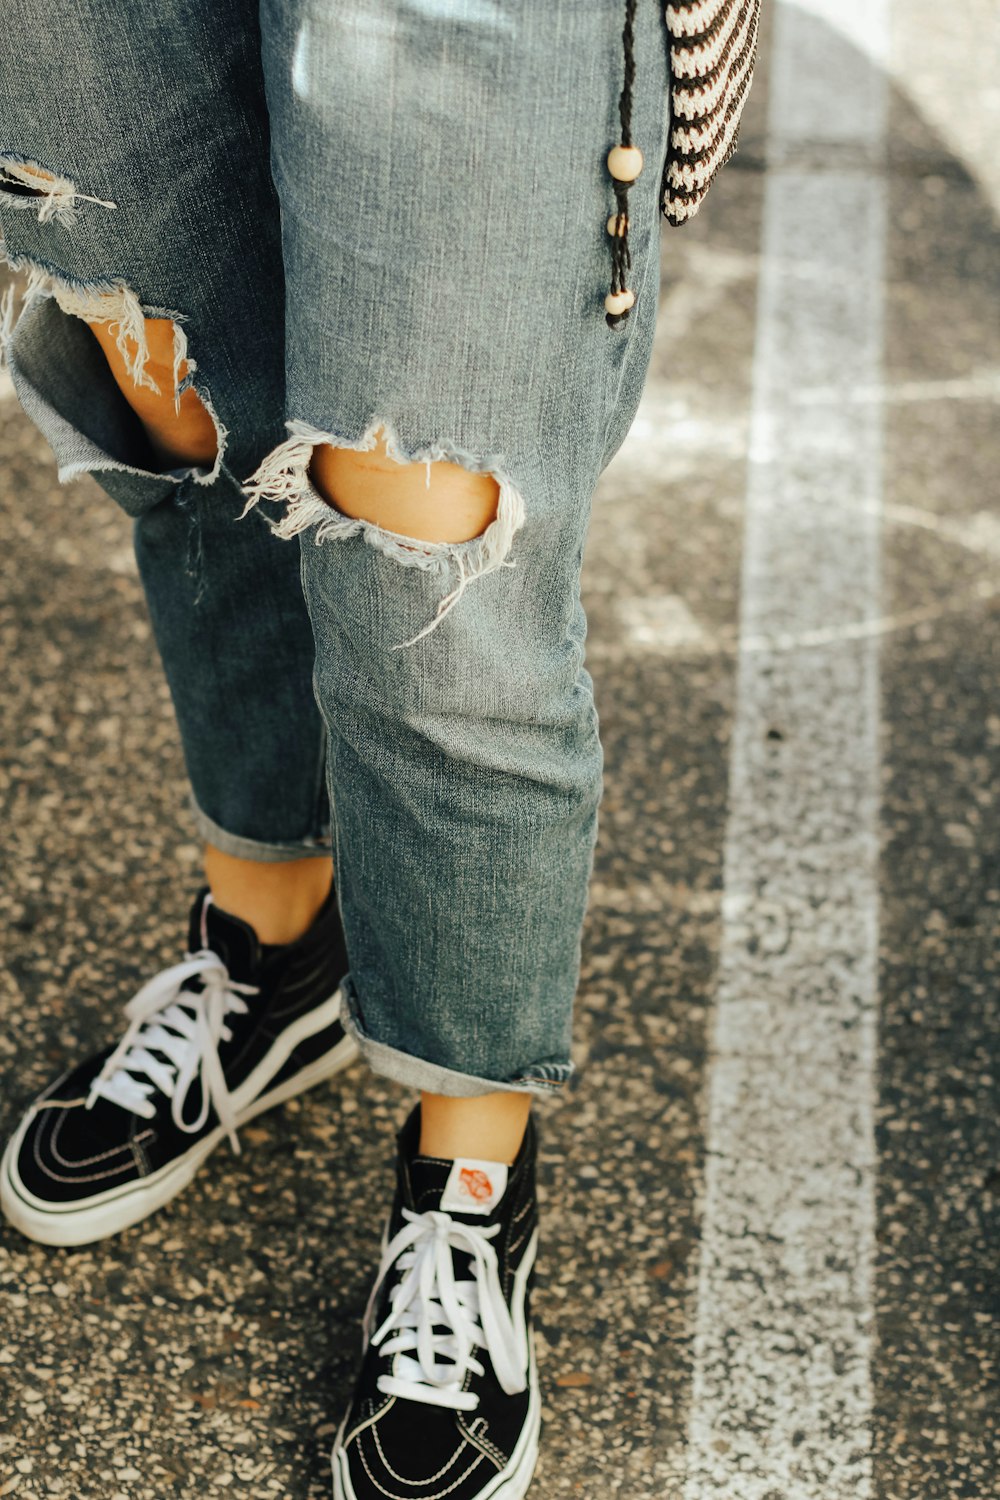 close-up photo of blue denim jeans and pair of black Vans sneakers photo –  Free Shoe Image on Unsplash